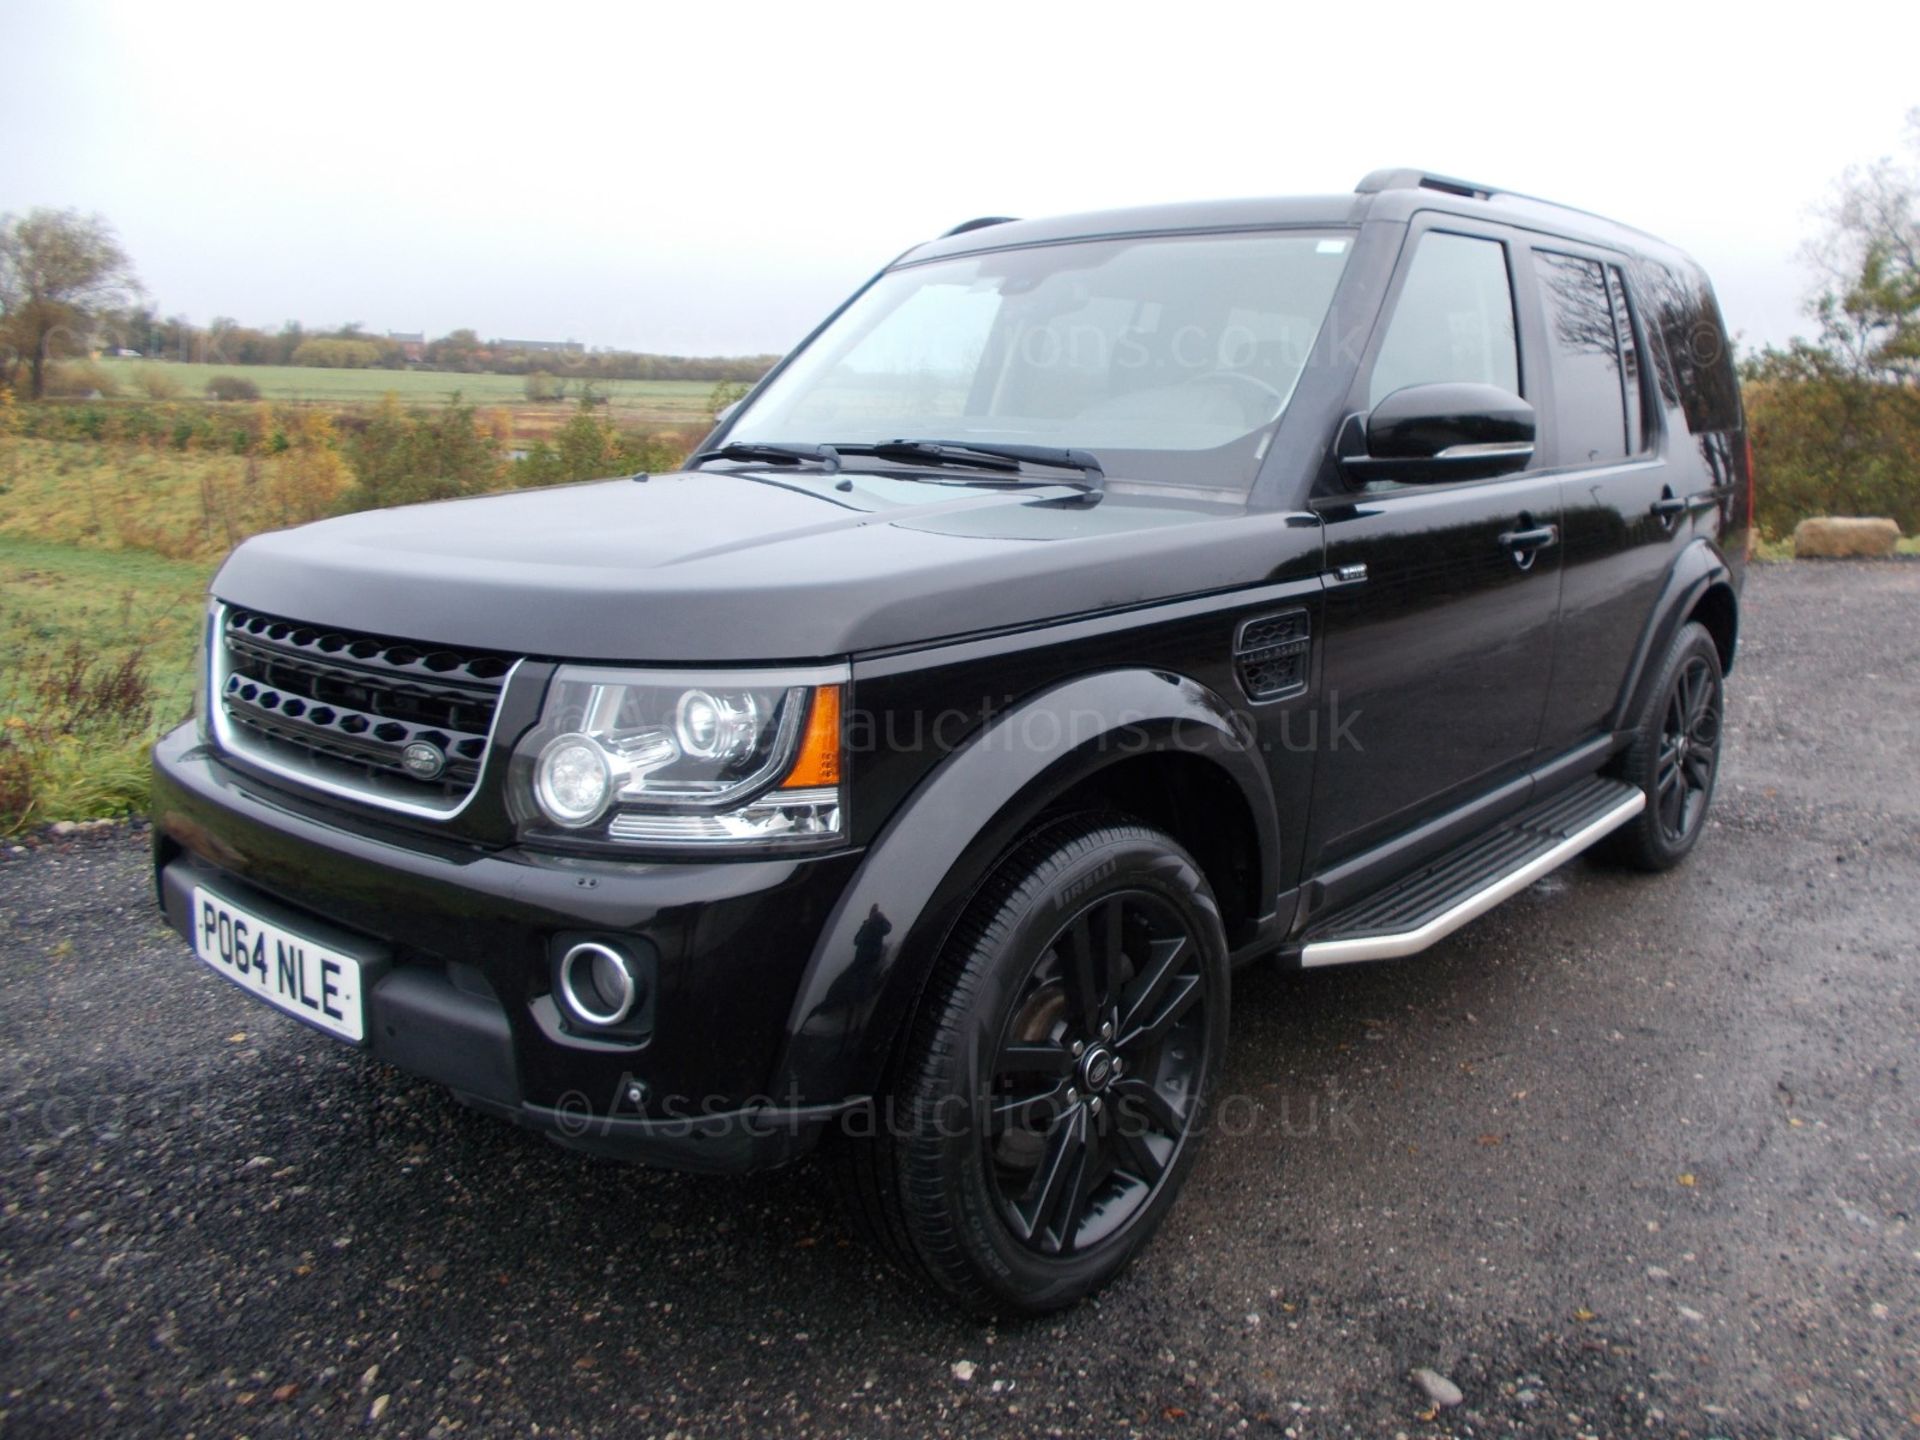 2015/64 LAND ROVER DISCOVERY HSE LUXURY SCV6 7 SEATER, 3.0 V6 PETROL SUPERCHARGED *PLUS VAT* - Image 3 of 28